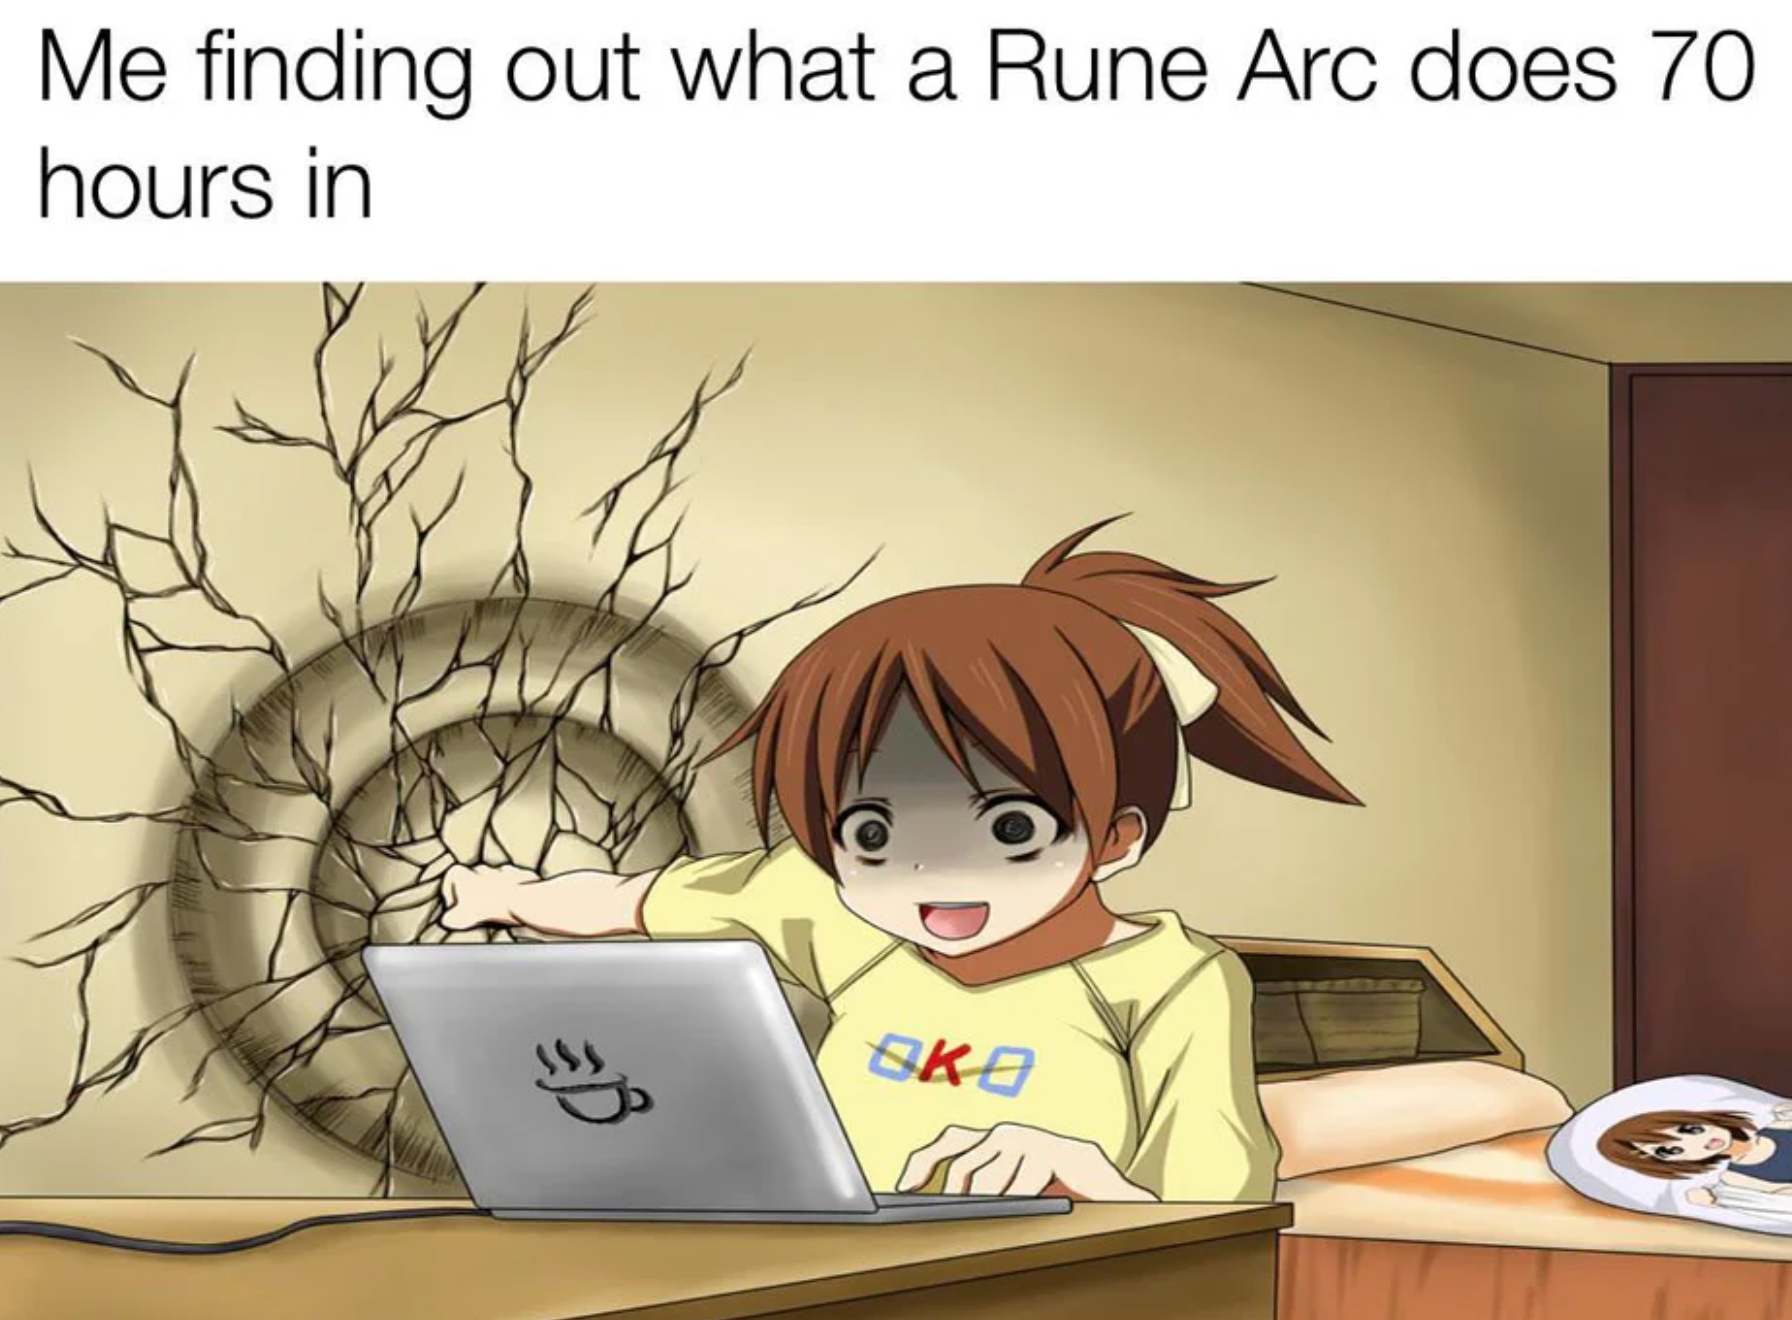 elden ring memes - make pp big - Me finding out what a Rune Arc does 70 hours in ke B